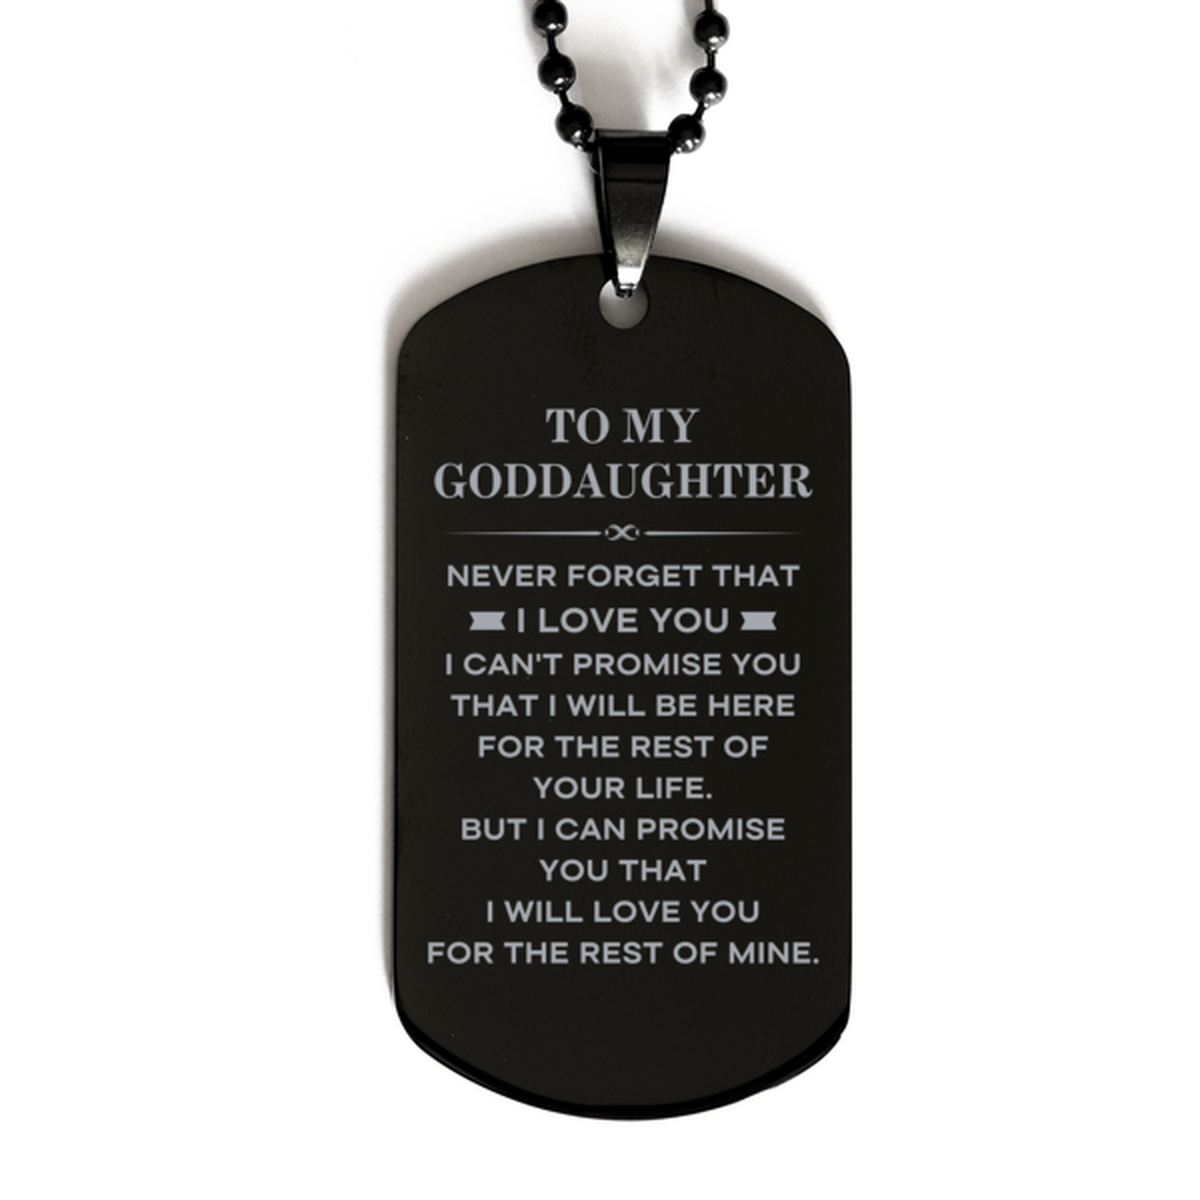 To My Goddaughter Gifts, I will love you for the rest of mine, Love Goddaughter Dog Tag Necklace, Birthday Christmas Unique Black Dog Tag For Goddaughter